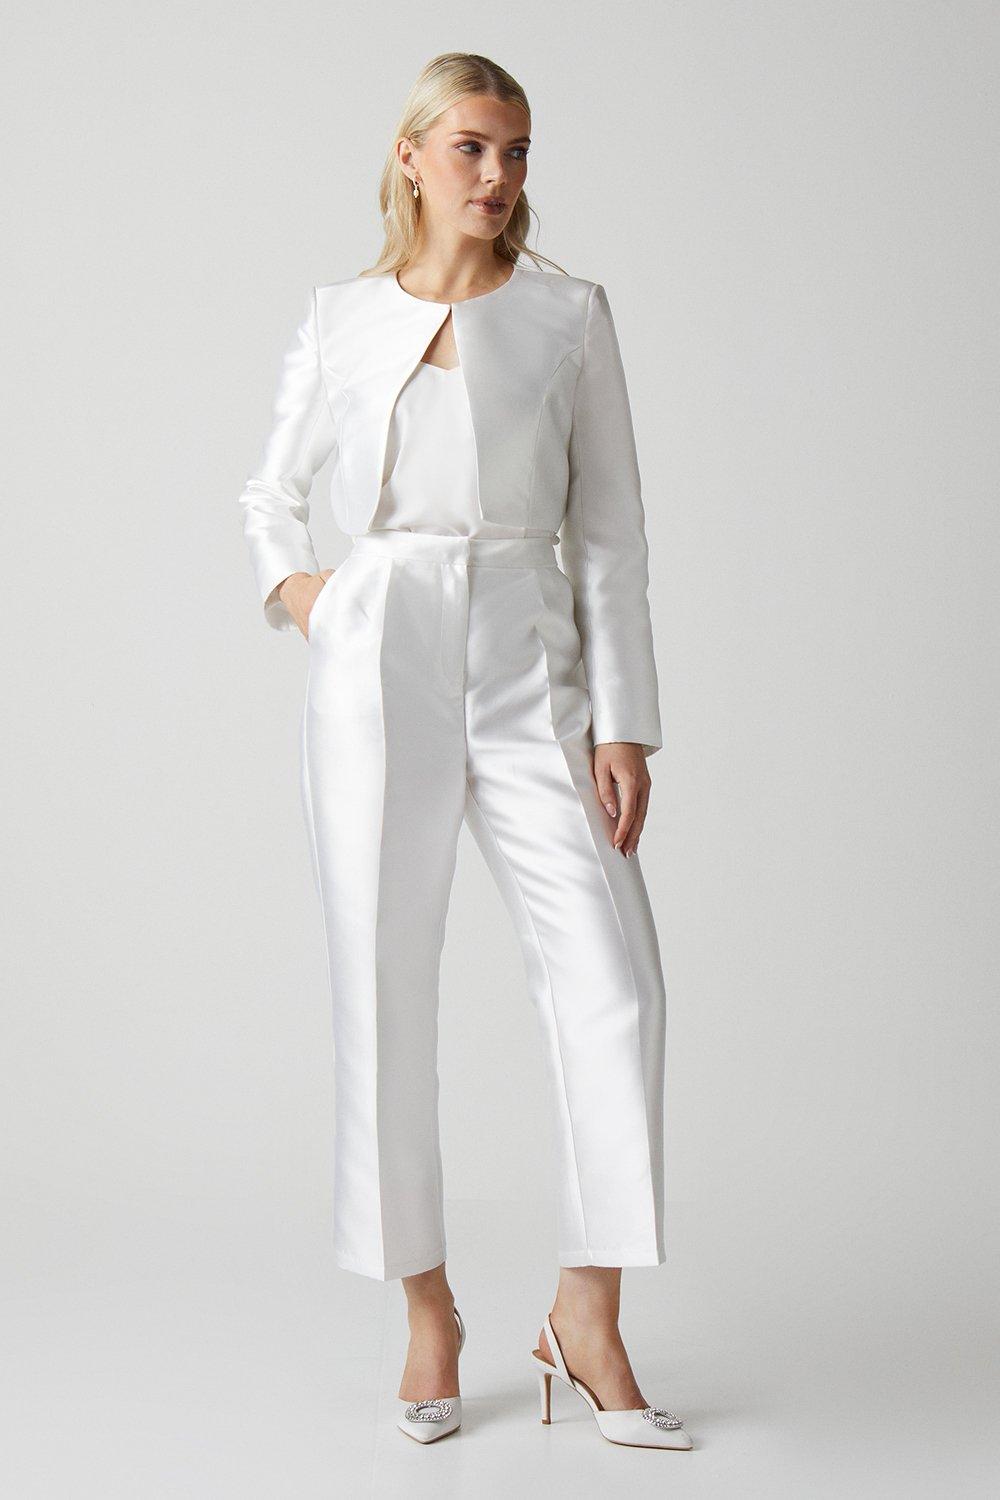 Twill High Waisted Bridal Trouser - Ivory